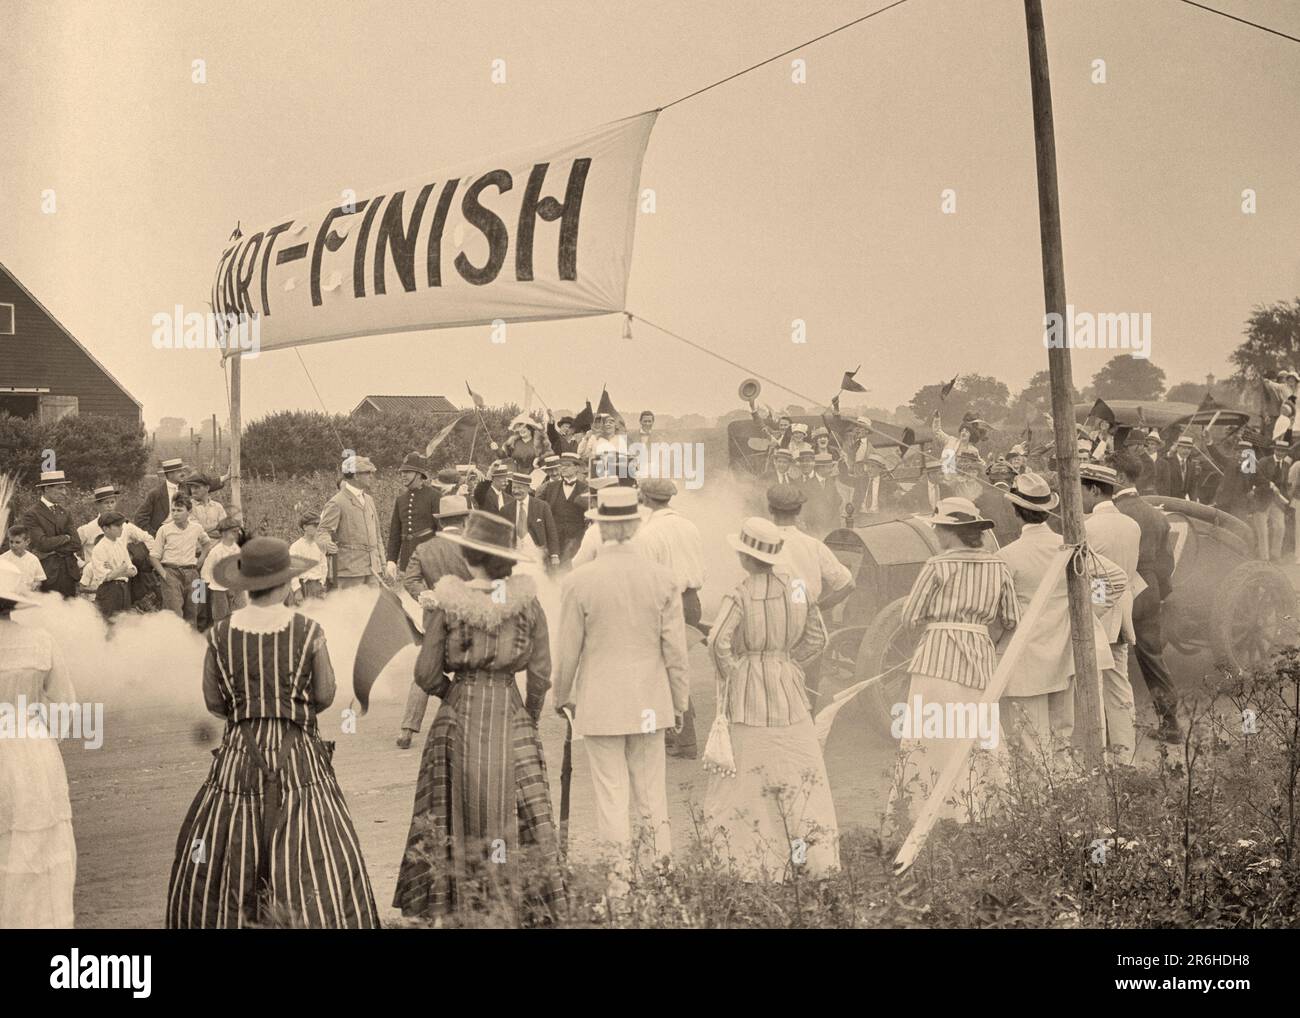 1910s SCENE AT START FINISH LINE OF AUTO RACE FROM THE LOST SILENT FILM THE SCARLET RUNNER FILMED BY VITAGRAPH IN BROOKLYN NY - q45917 CPC001 HARS COMMUNICATION PRODUCTION LOST COSTUMES JOY ACTOR HISTORY CELEBRATION FEMALES UNITED STATES COPY SPACE LADIES PERSONS INSPIRATION UNITED STATES OF AMERICA MALES ENTERTAINMENT TRANSPORTATION SPECTATORS B&W MOVIES BROOKLYN NORTH AMERICA NORTH AMERICAN HAPPINESS HIGH ANGLE ADVENTURE PERFORMER EXCITEMENT FAMOUS ENTERTAINER NYC OCCUPATIONS SILENT NEW YORK ACTORS AUTOMOBILES CITIES COMPANY DRAMA IMAGINATION STYLISH DIRECTED NEW YORK CITY PRODUCING Stock Photo